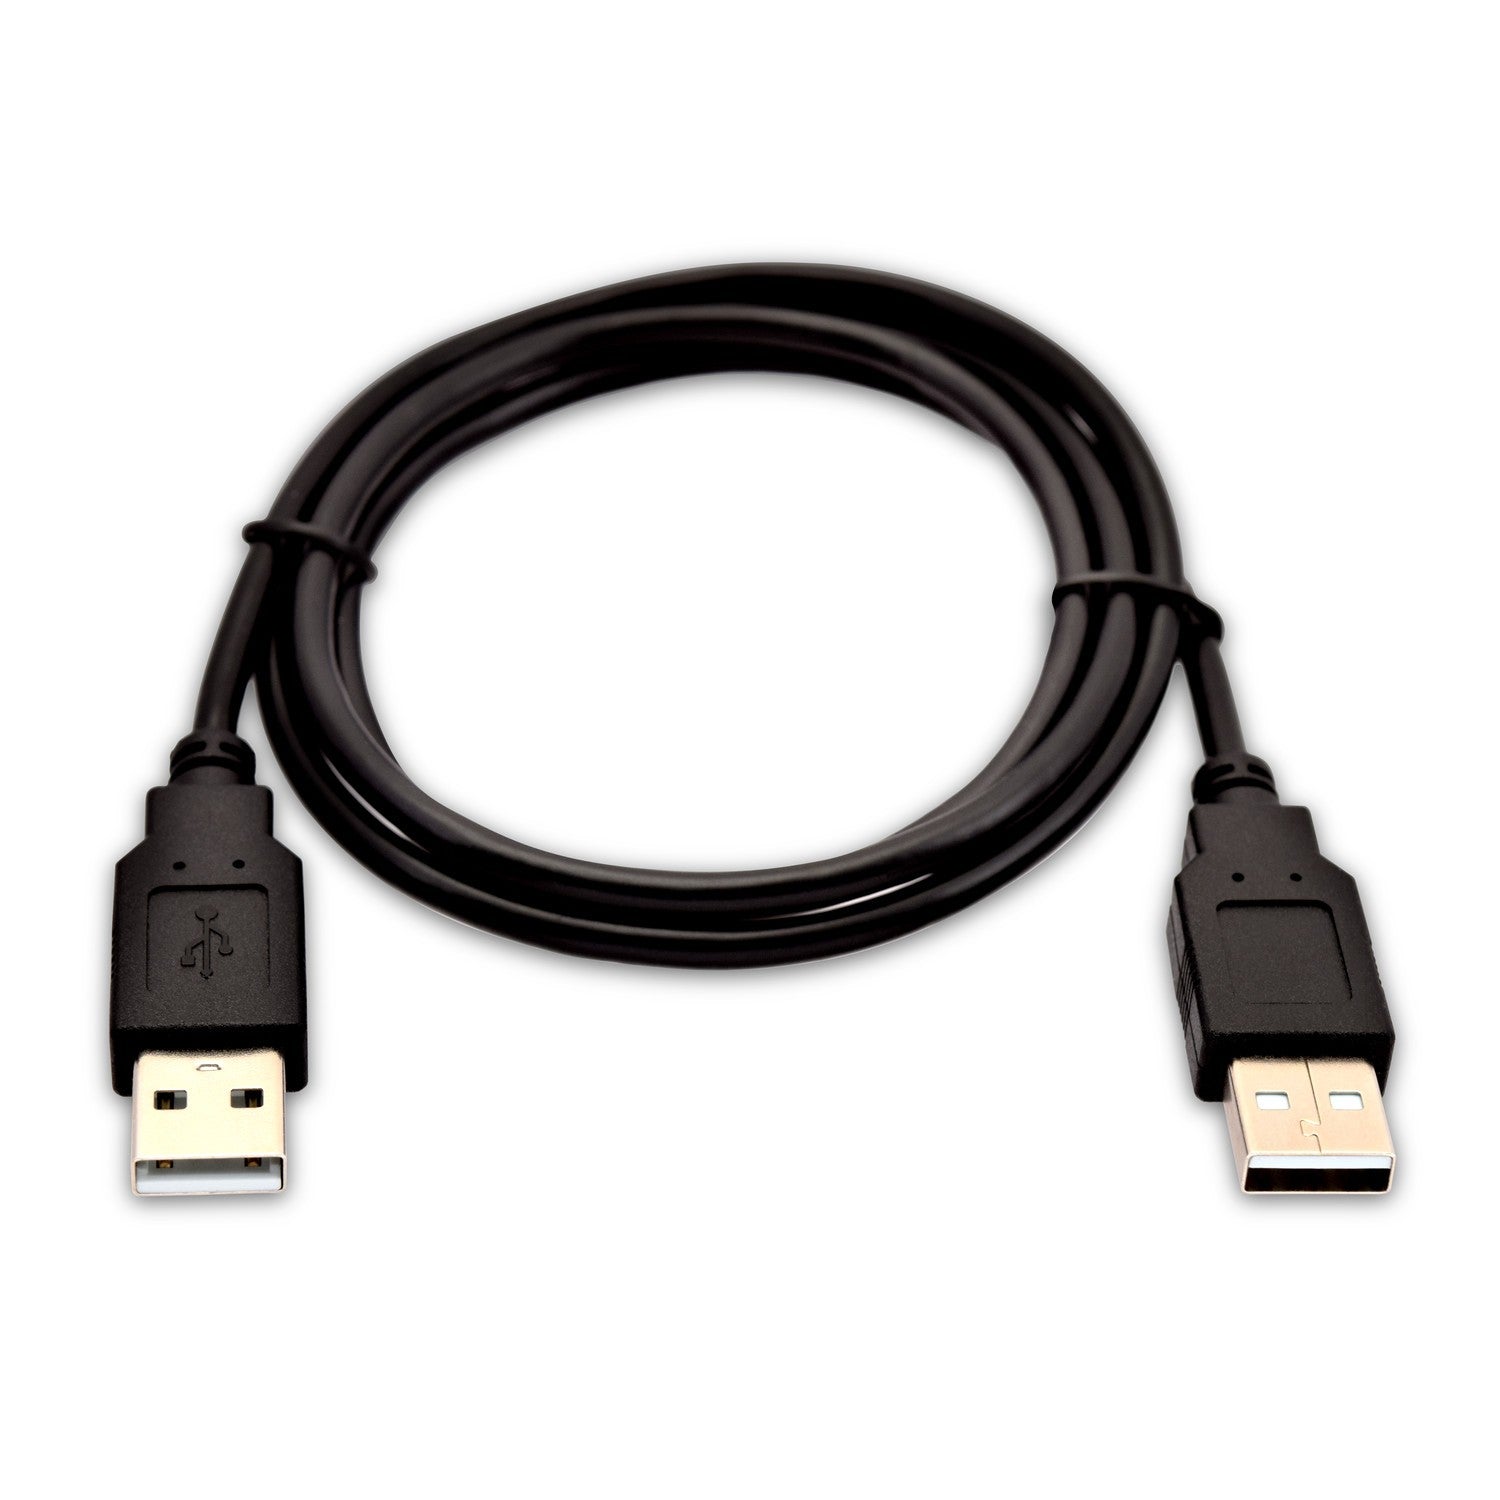 V7 Black USB Cable USB 2.0 A Male to USB 2.0 A Male 2m 6.6ft